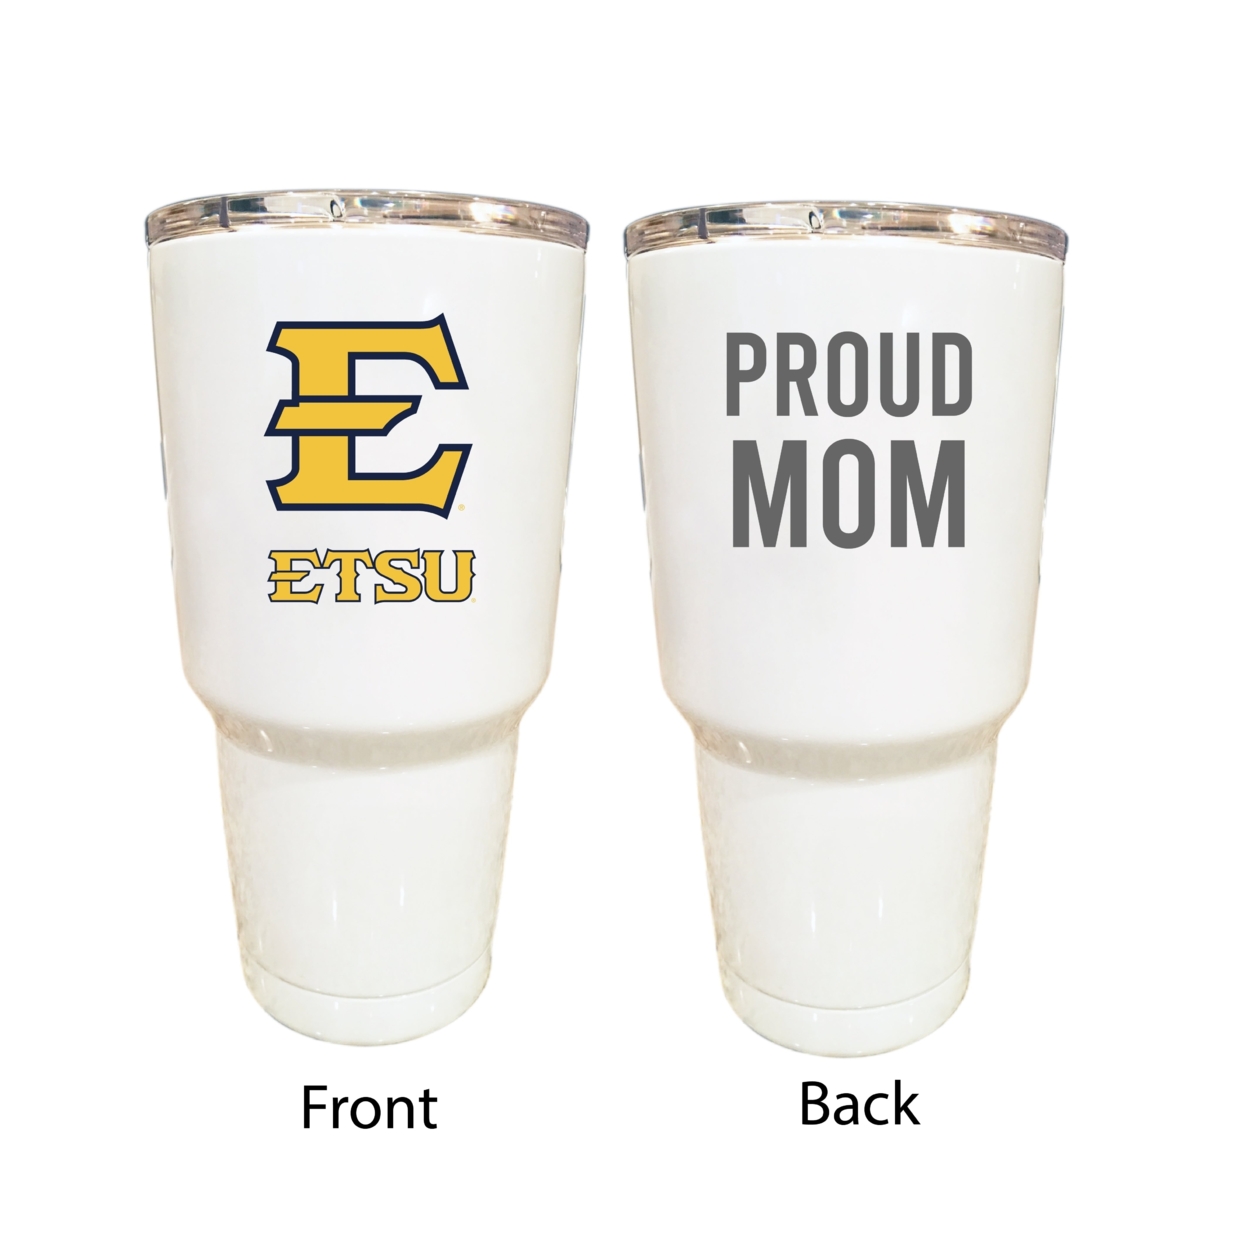 East Tennessee State University Proud Mom 24 Oz Insulated Stainless Steel Tumblers Choose Your Color.